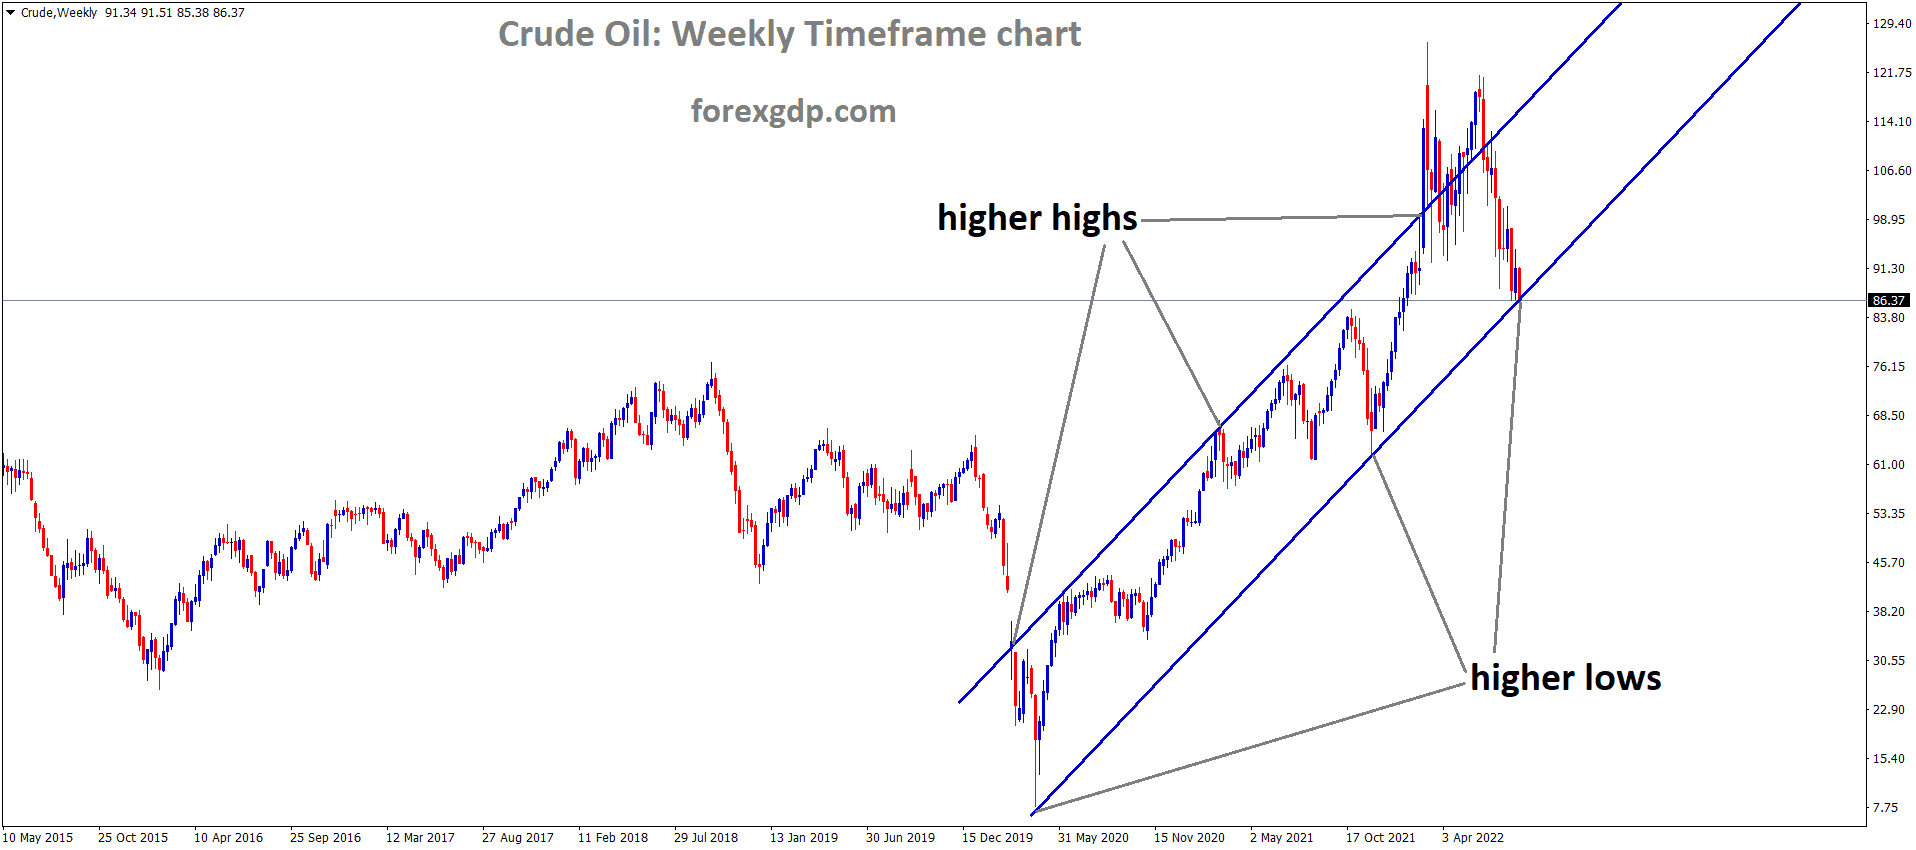 Crude oil is moving in an Ascending channel and the Market has reached the higher low area of the channel 2